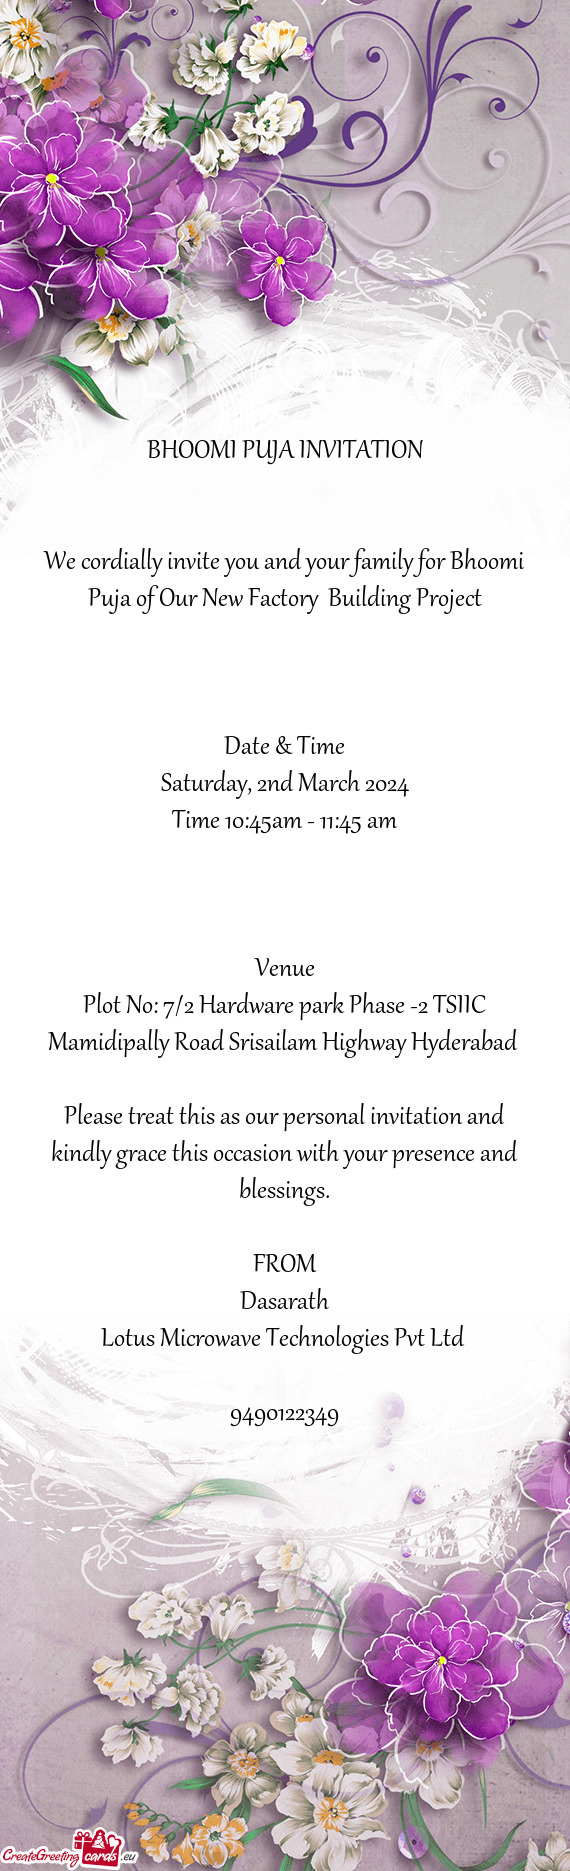 We cordially invite you and your family for Bhoomi Puja of Our New Factory Building Project